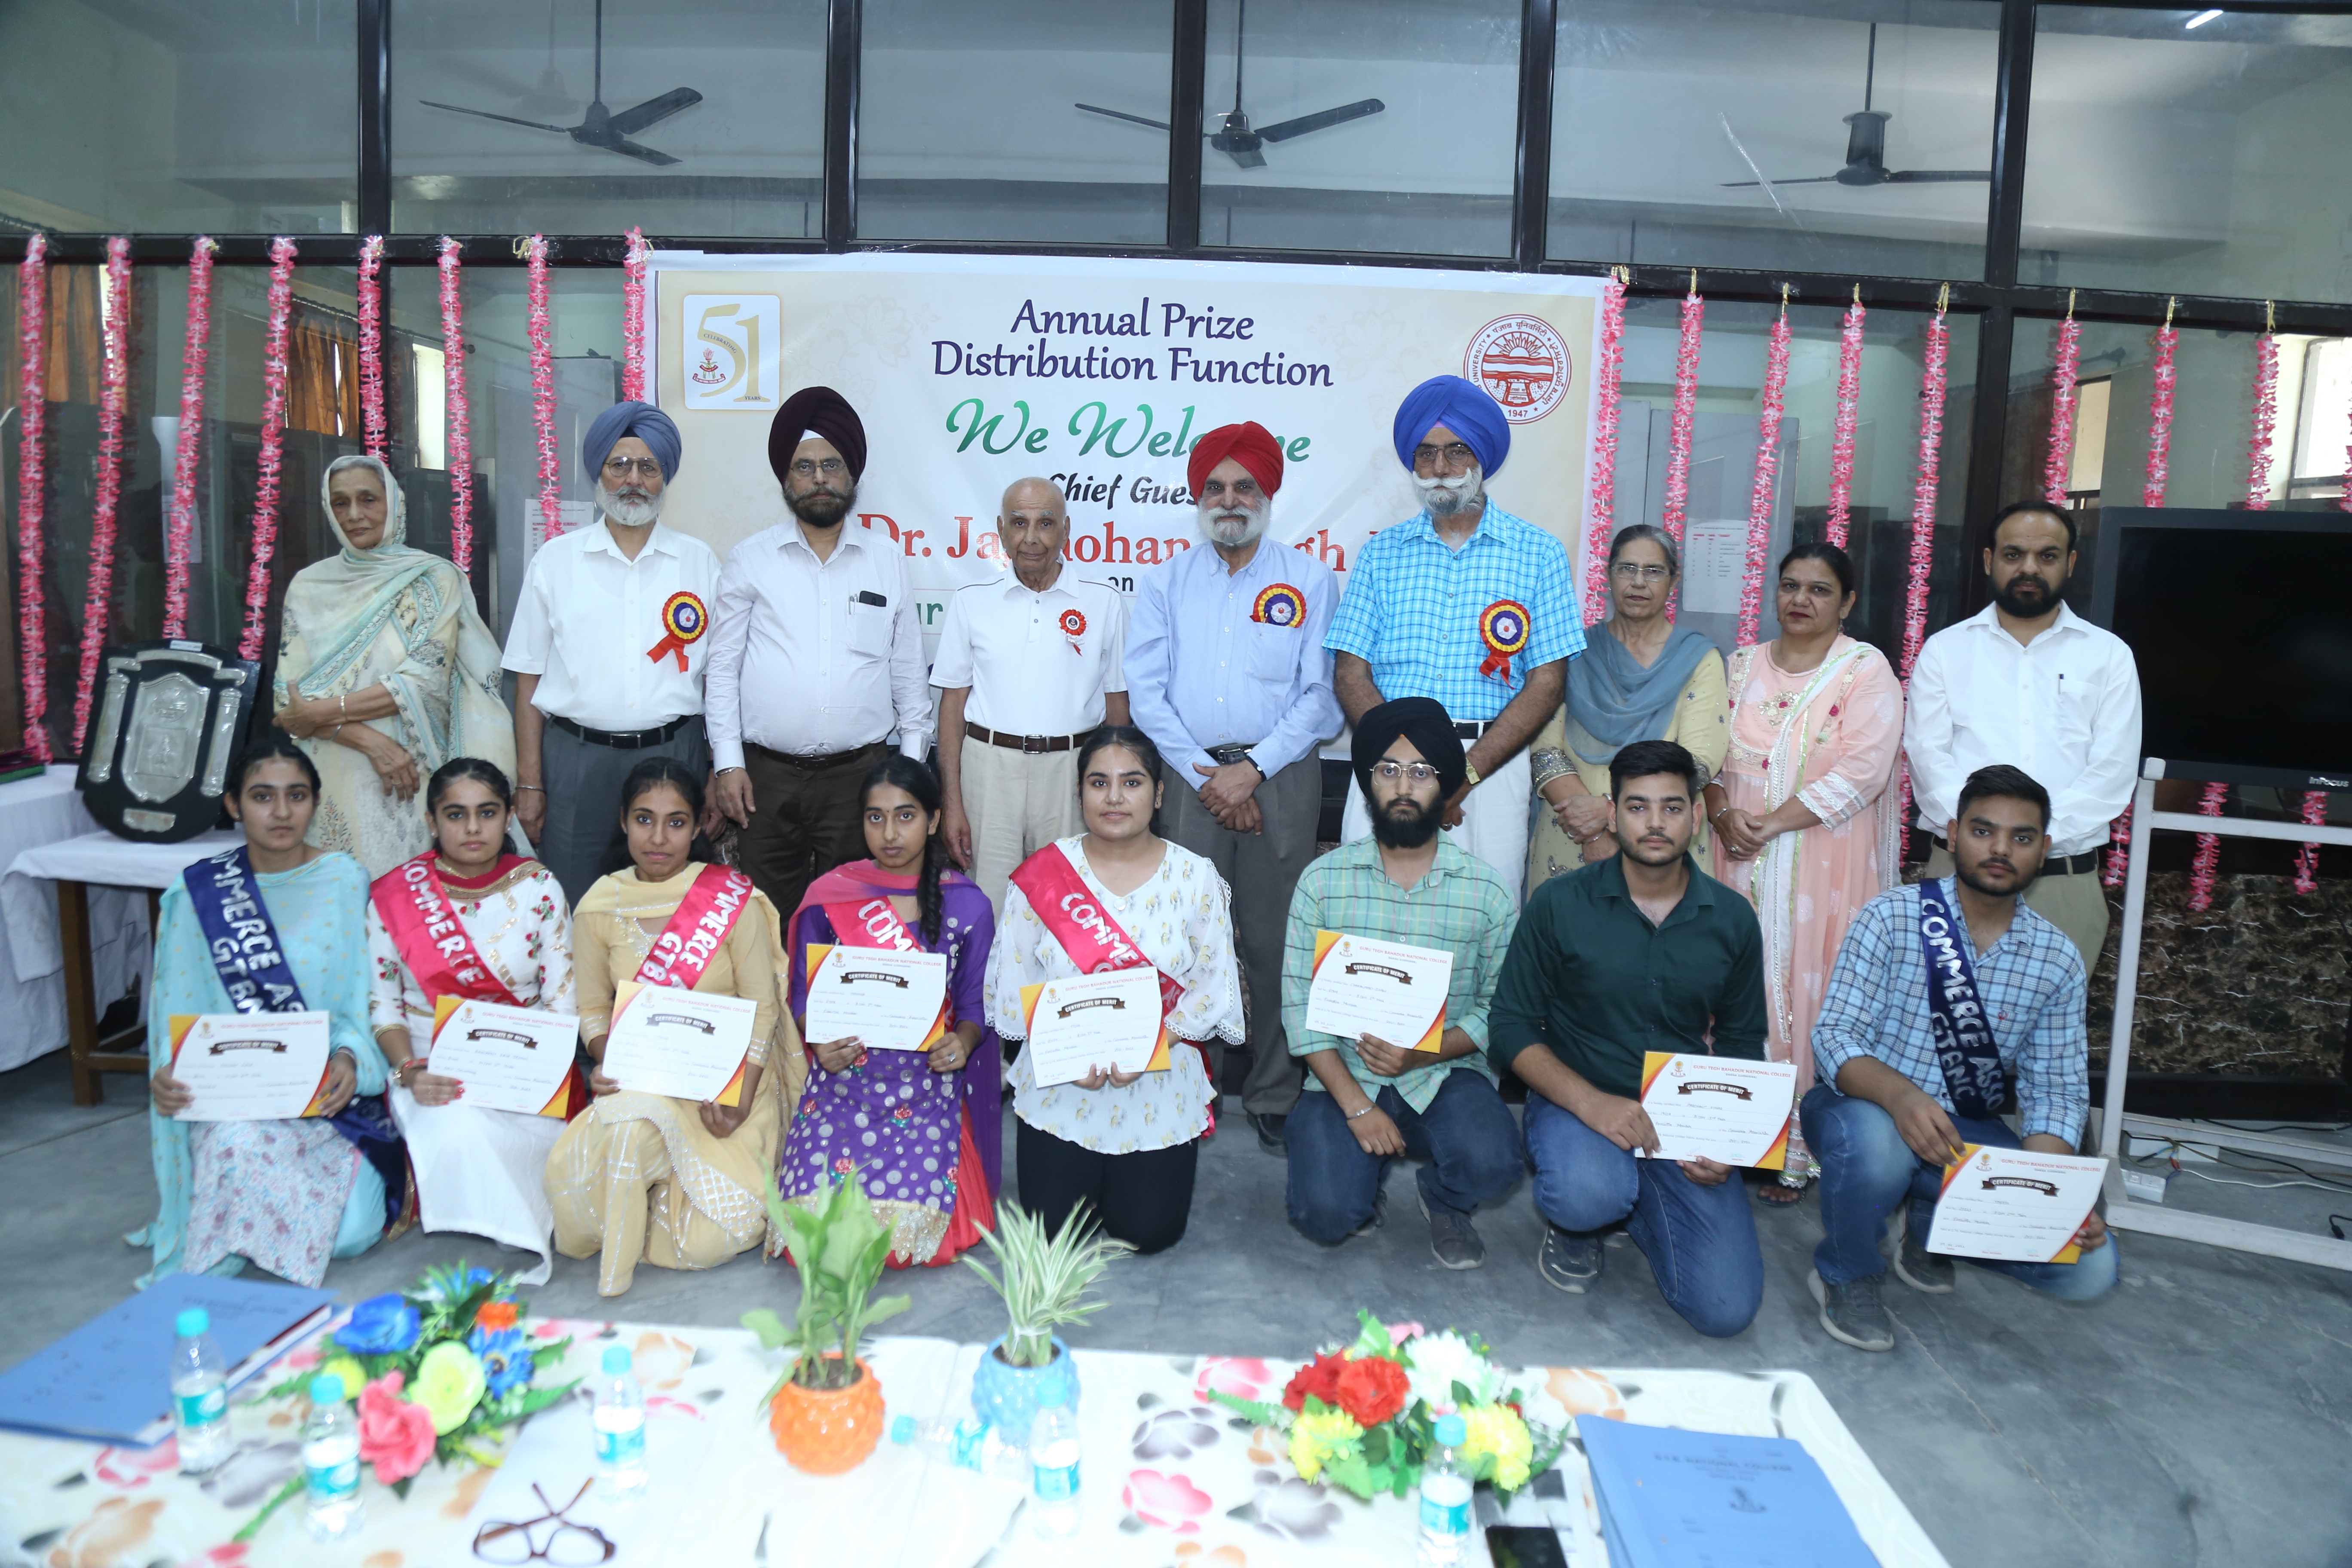 Campus notes: Prize Distribution Function held